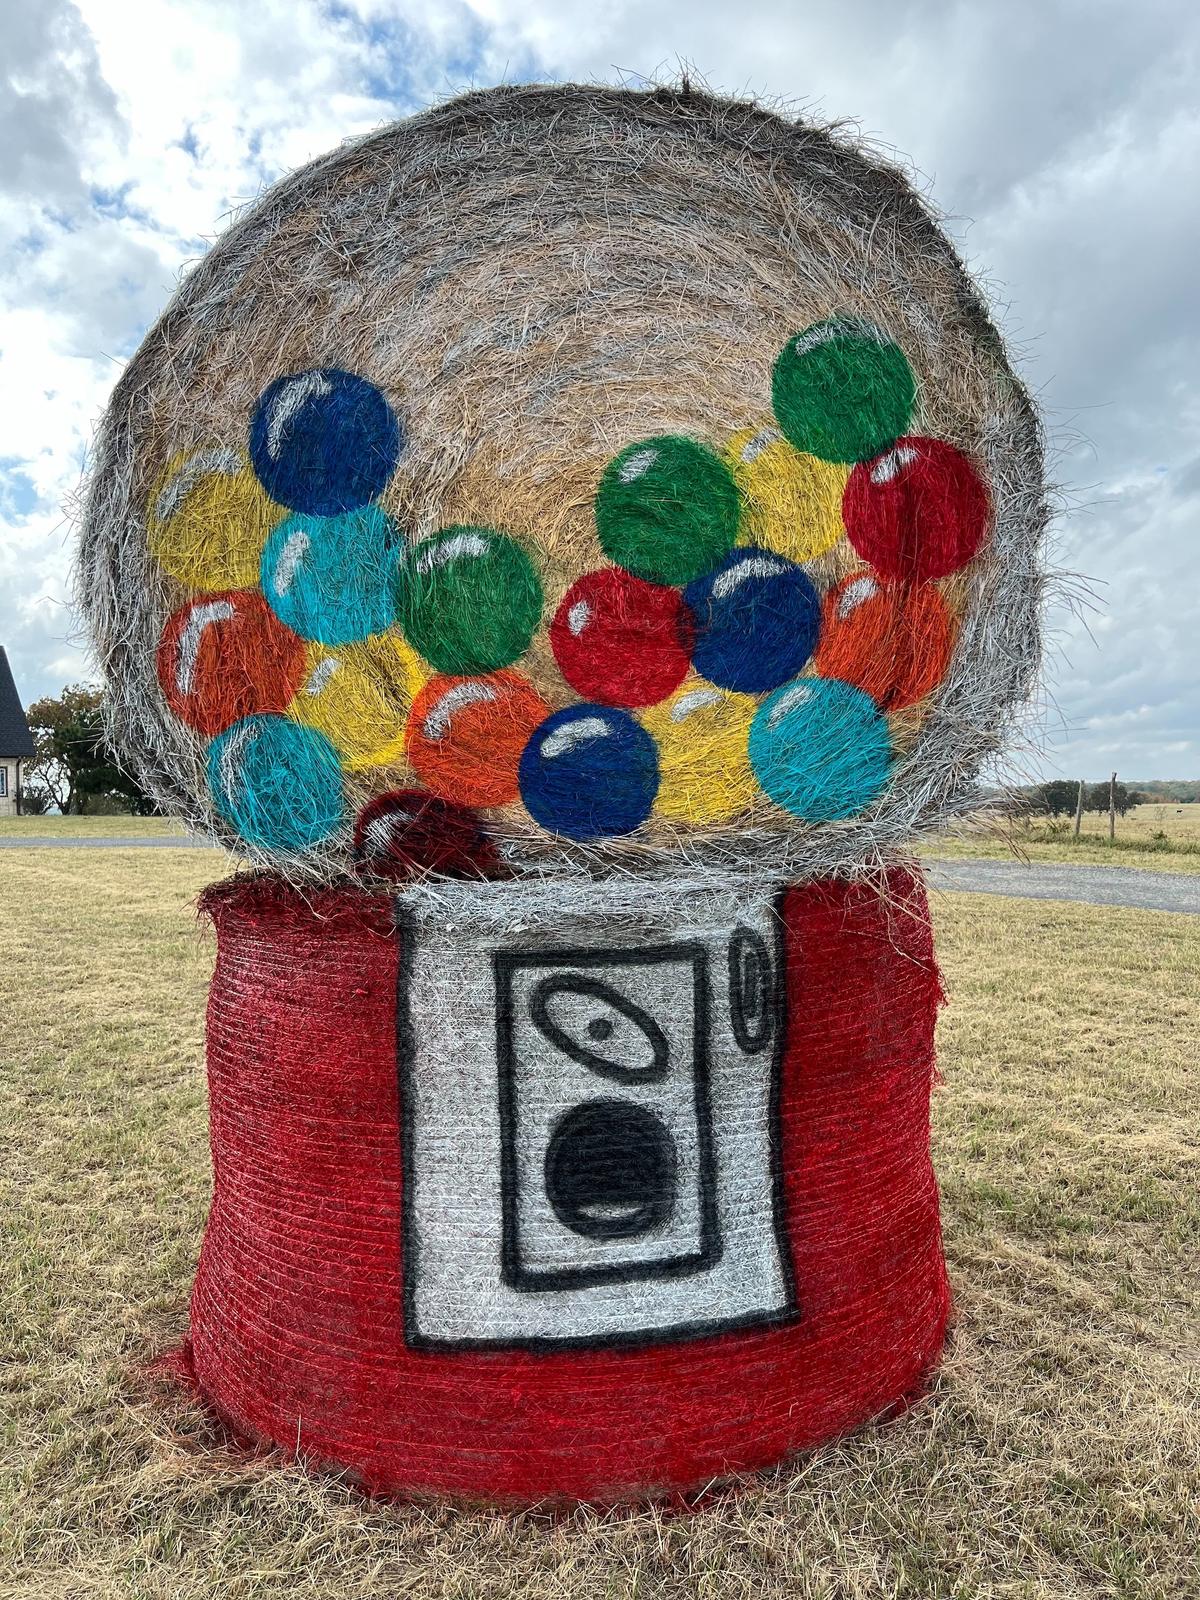 The hay bale sculpture of a gumball machine. (Courtesy of <a href="https://www.facebook.com/groups/320200669469831/">Melissa Kelley</a>)